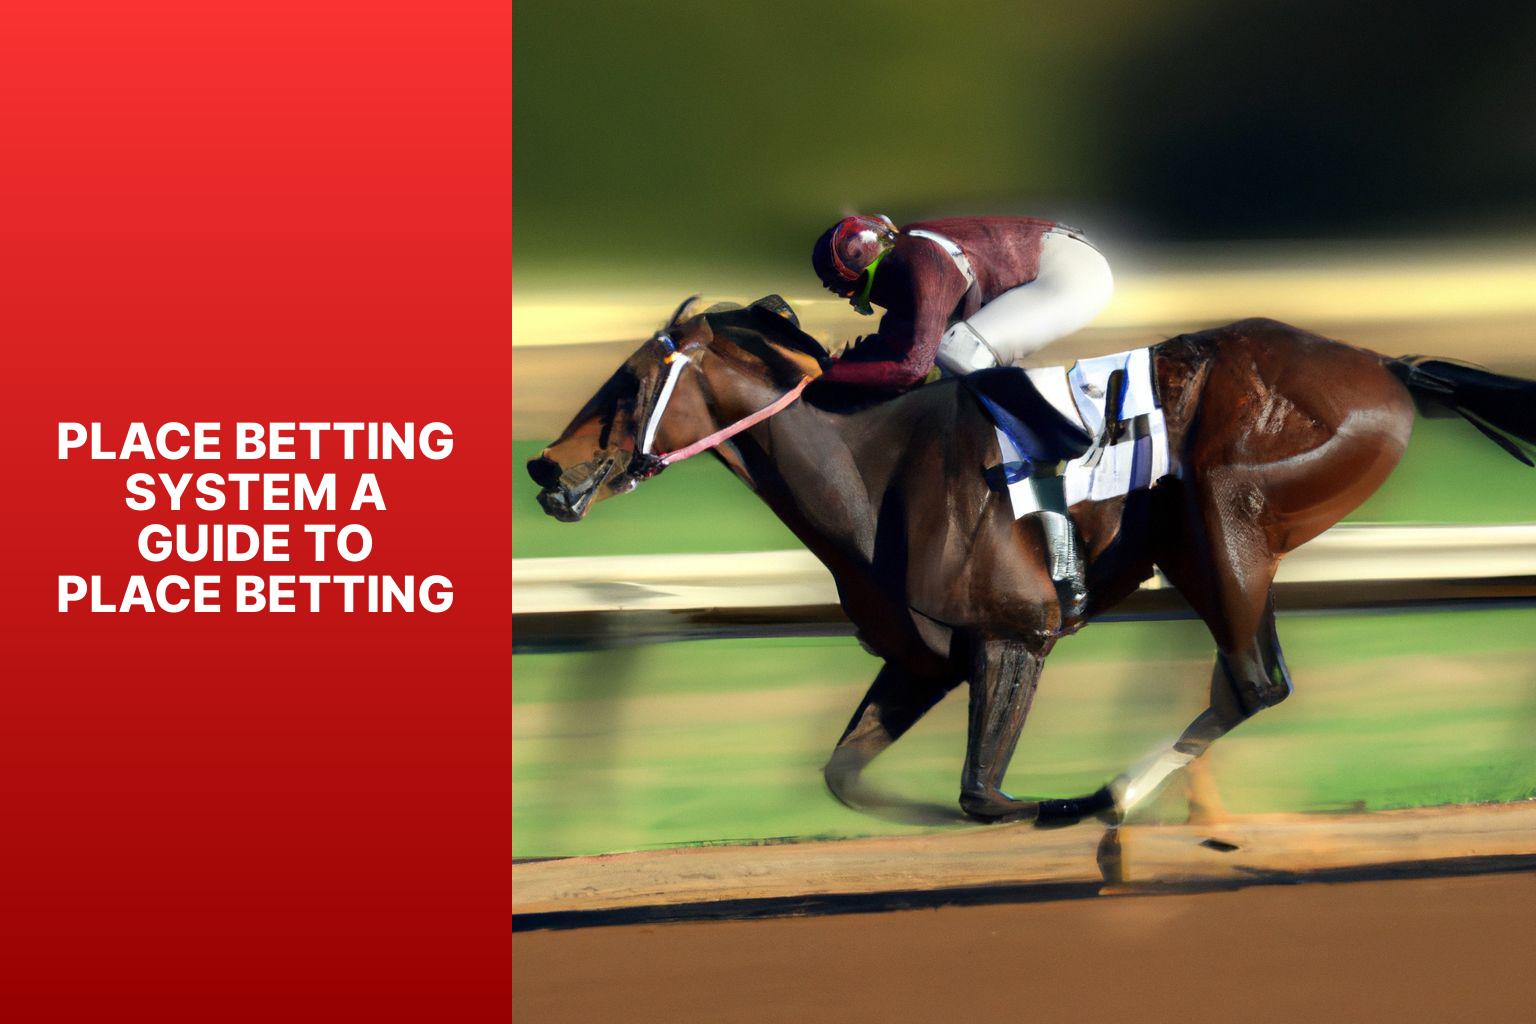 Place Betting System A Guide to Place Betting